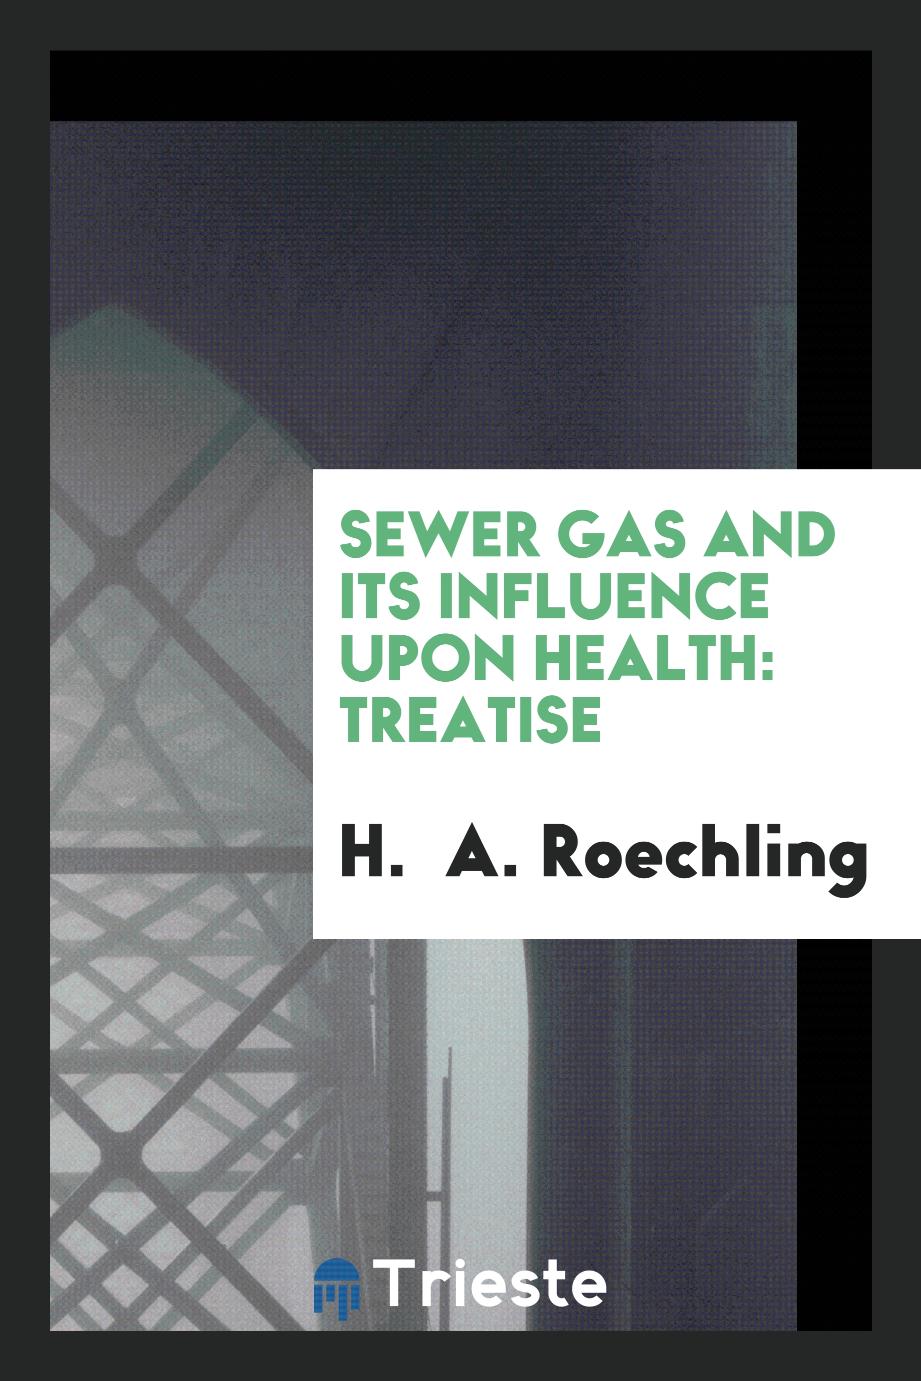 Sewer gas and its influence upon health: treatise